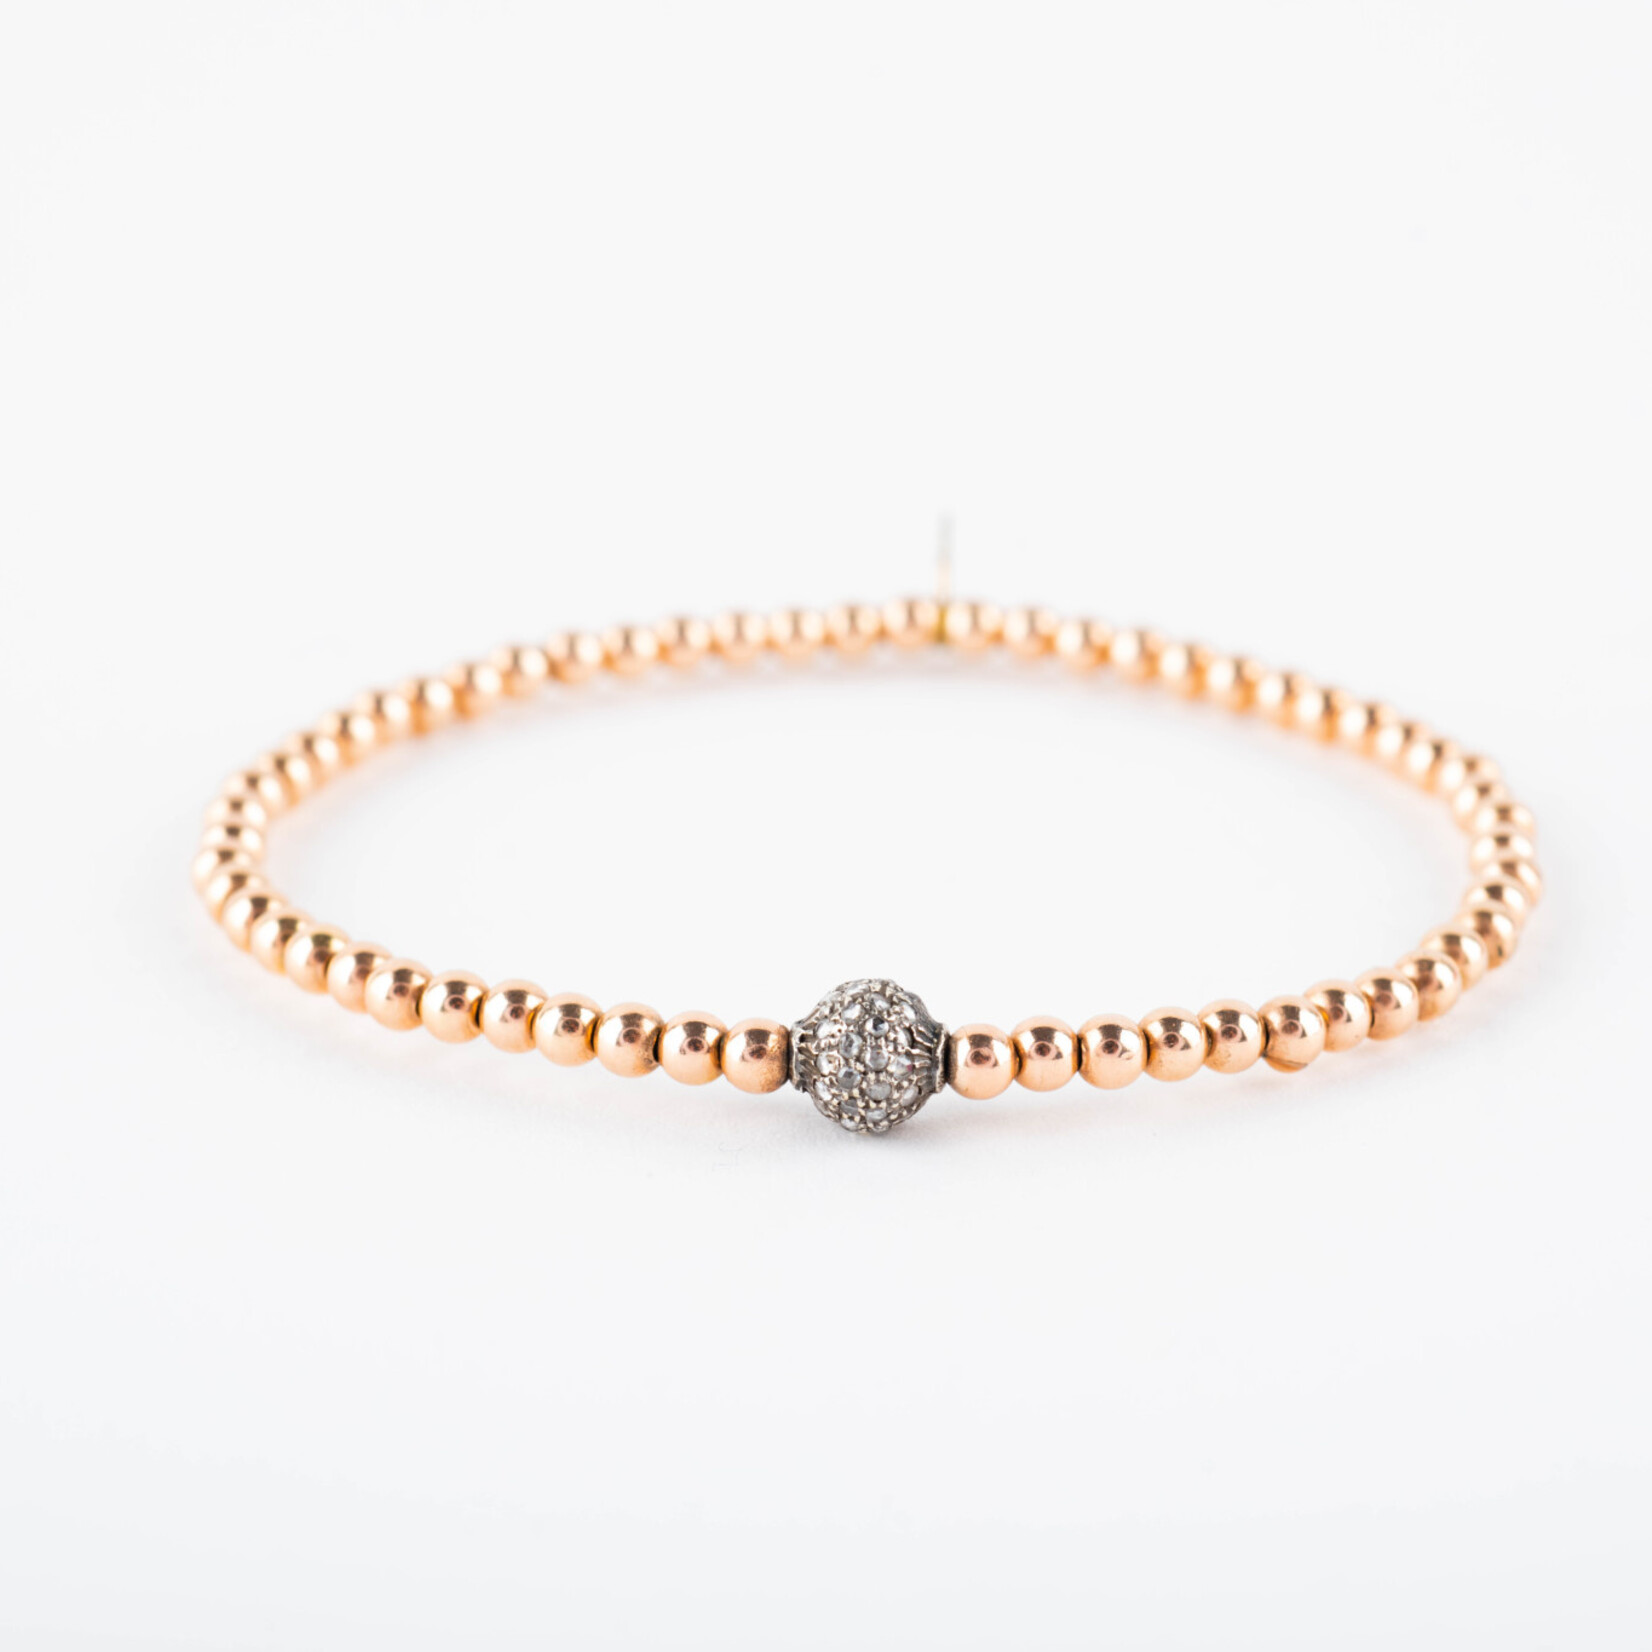 Mina Danielle Rose Gold Beaded Stacking with 8mm Oxidized Diamond Bead